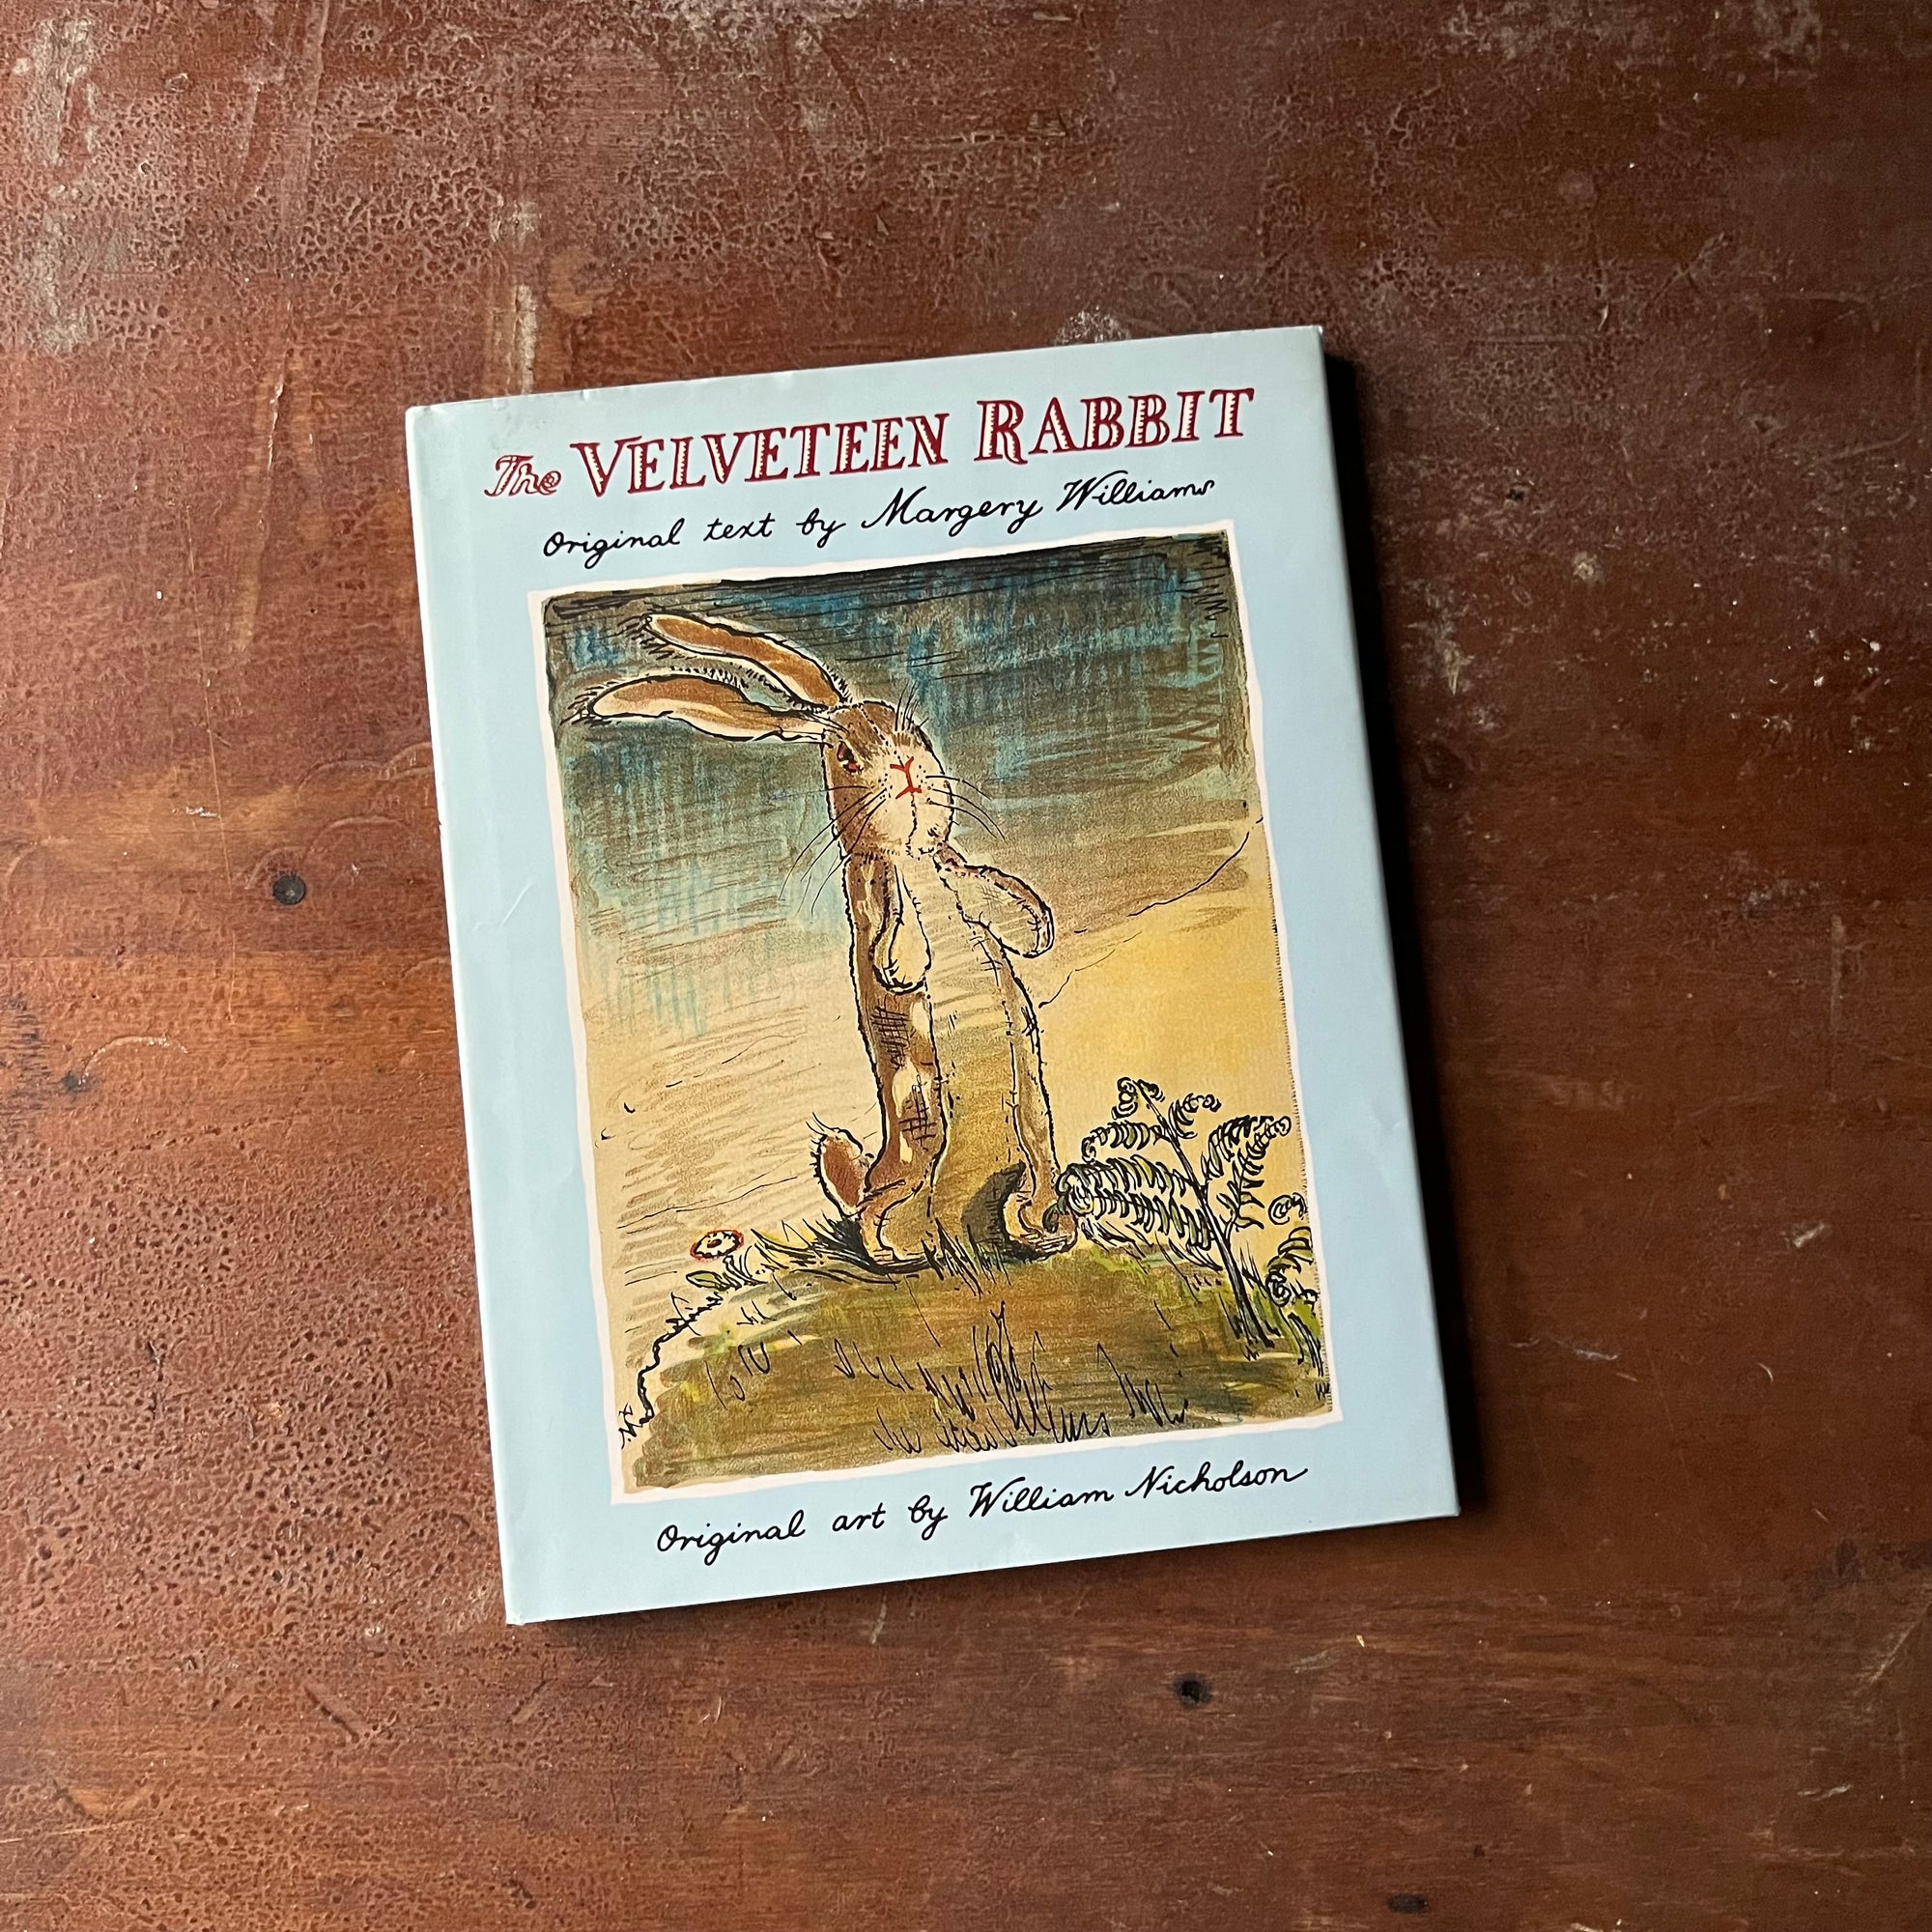 The Velveteen Rabbit written by Margery Williams with illustrations by William Nicholson-1991 Edition-vintage children's picture book-view of the dust jacket's front cover in light blue with an illustration of the Velveteen Rabbit on the cover